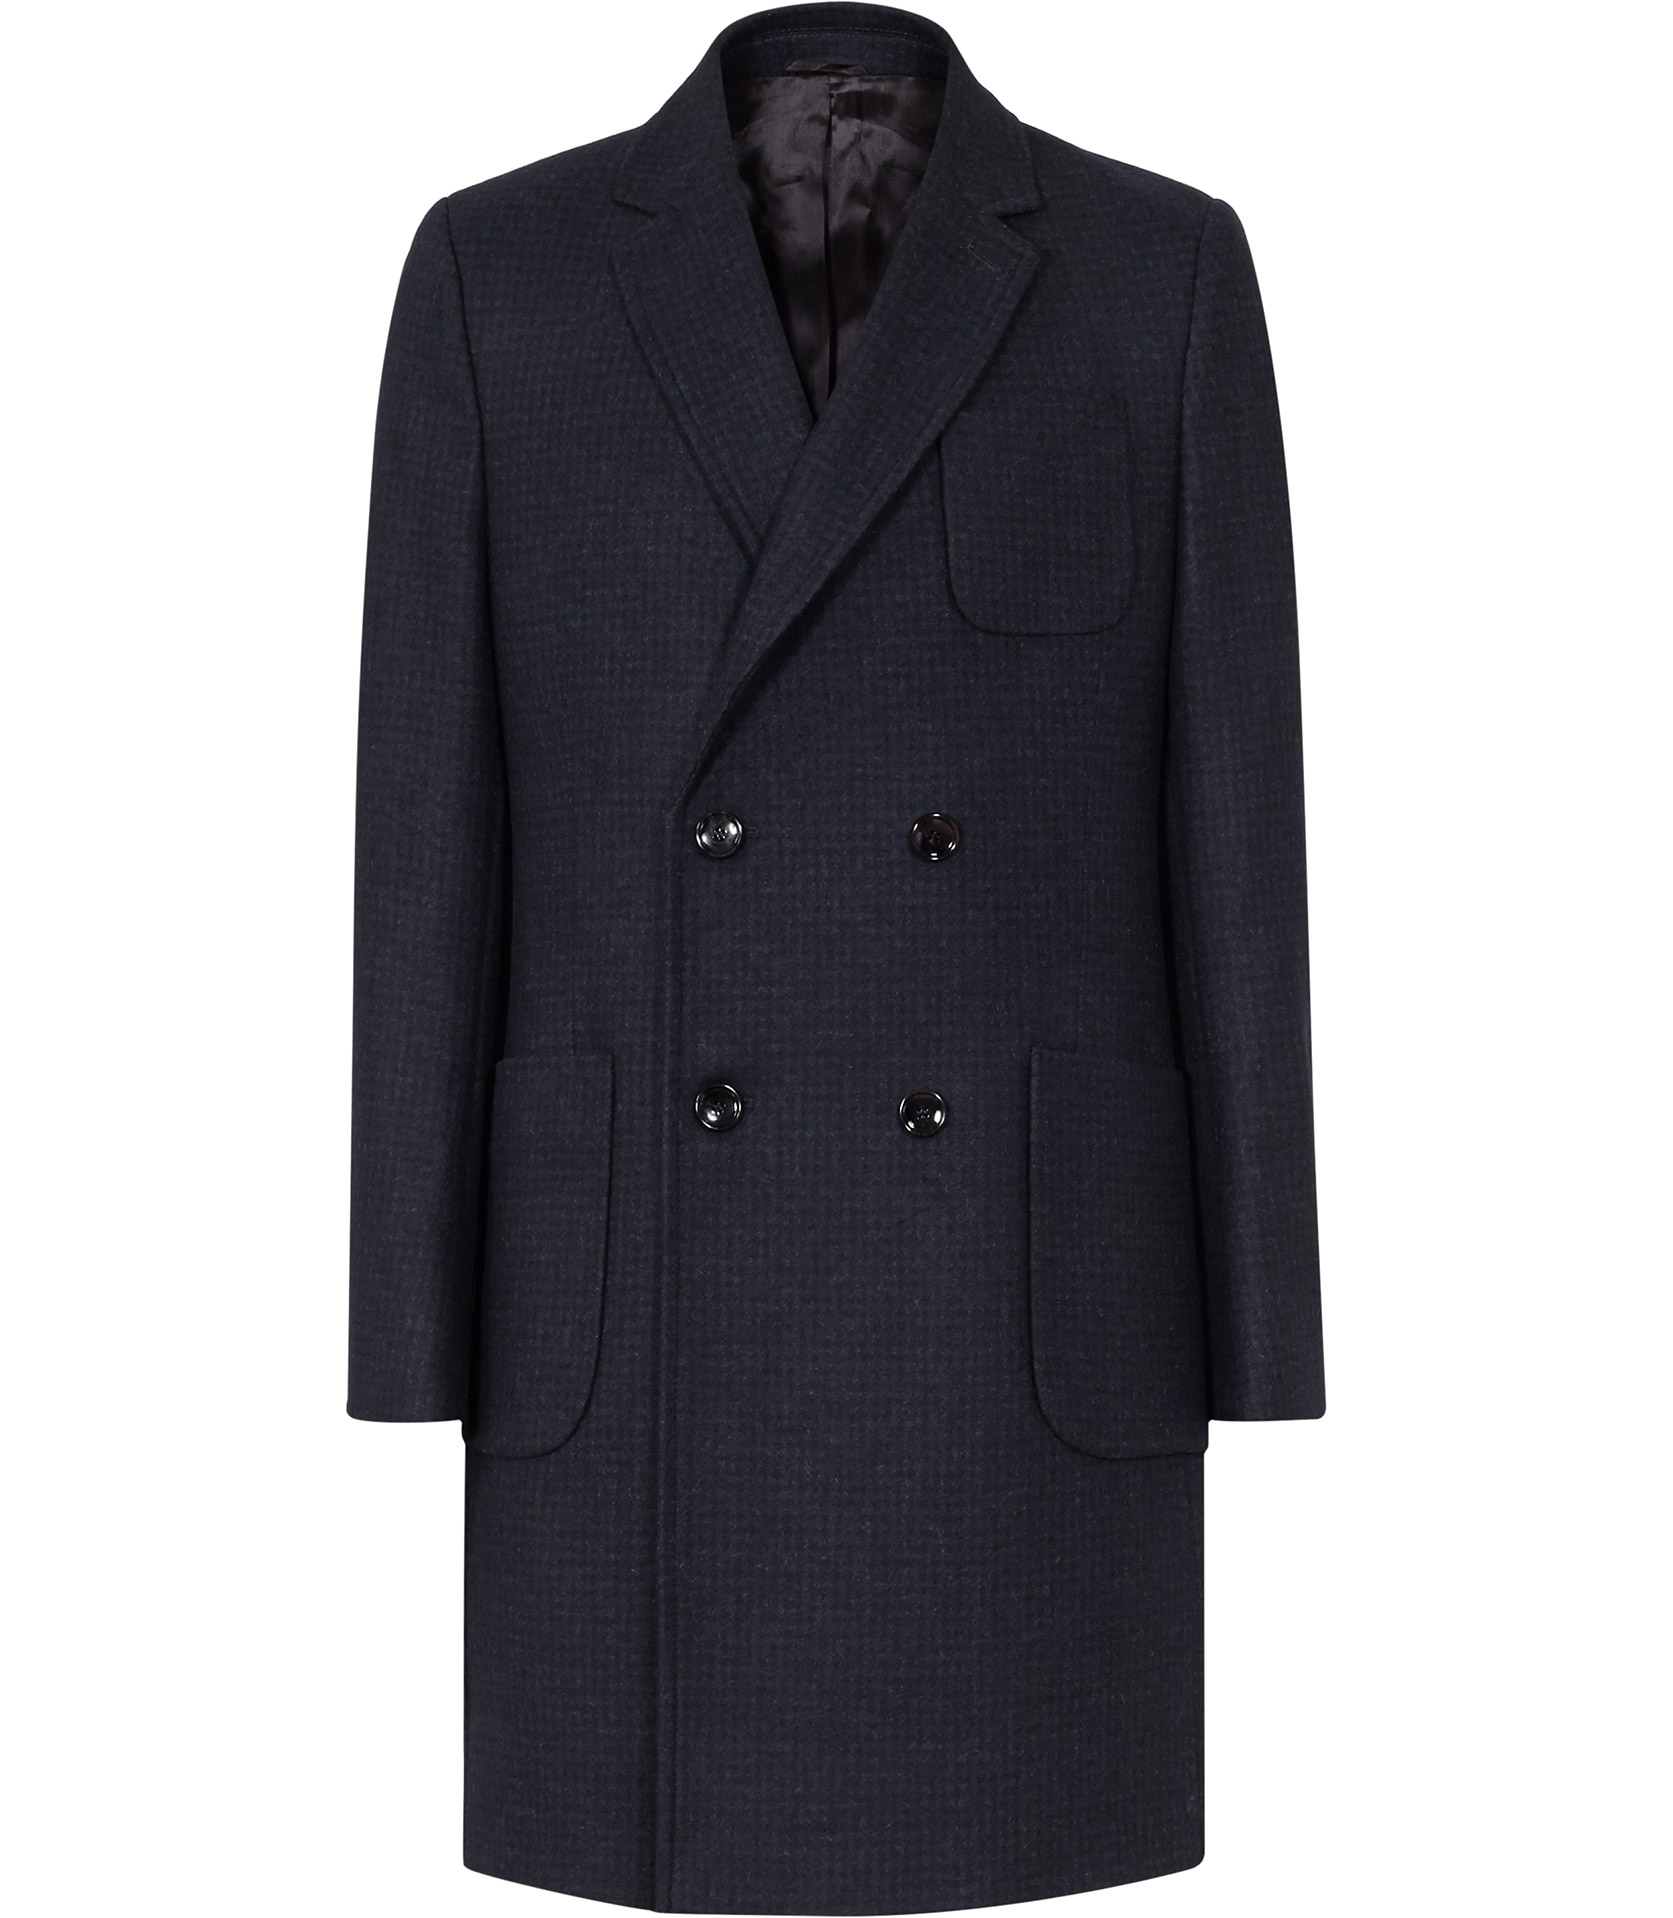 Lyst - Reiss Jeremy Double Breasted Check Coat in Black for Men